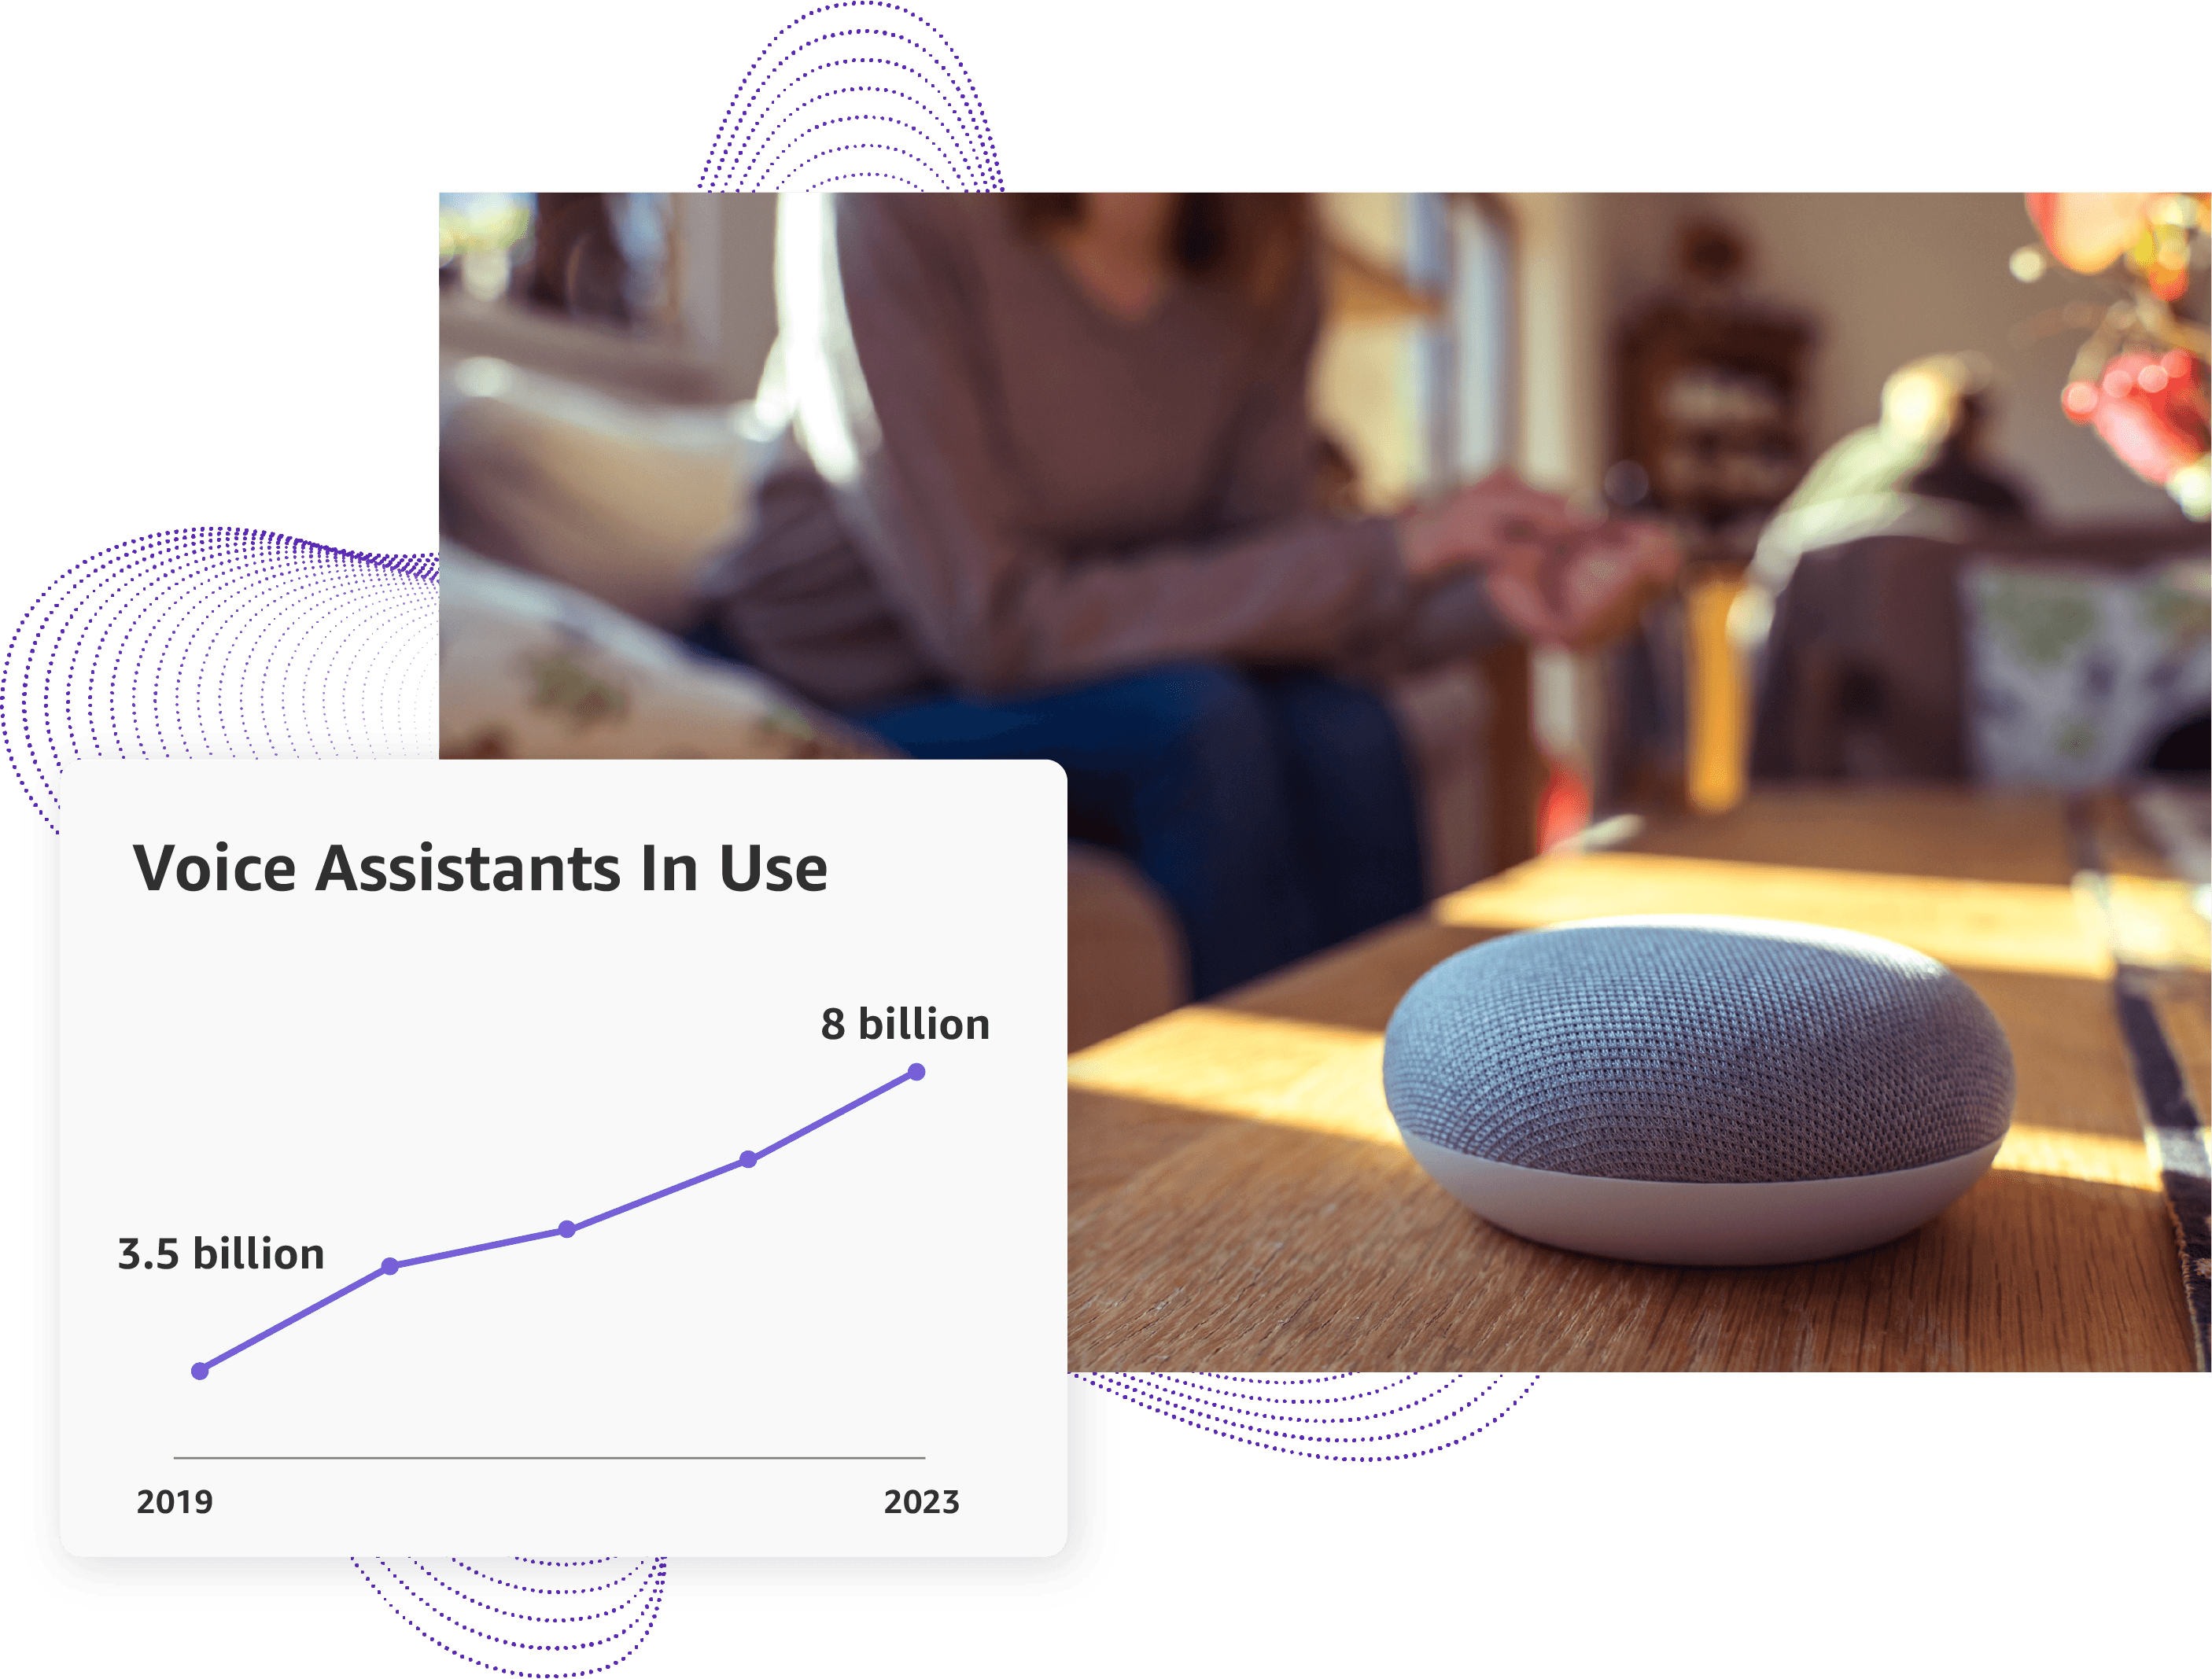 Voice assistants in use